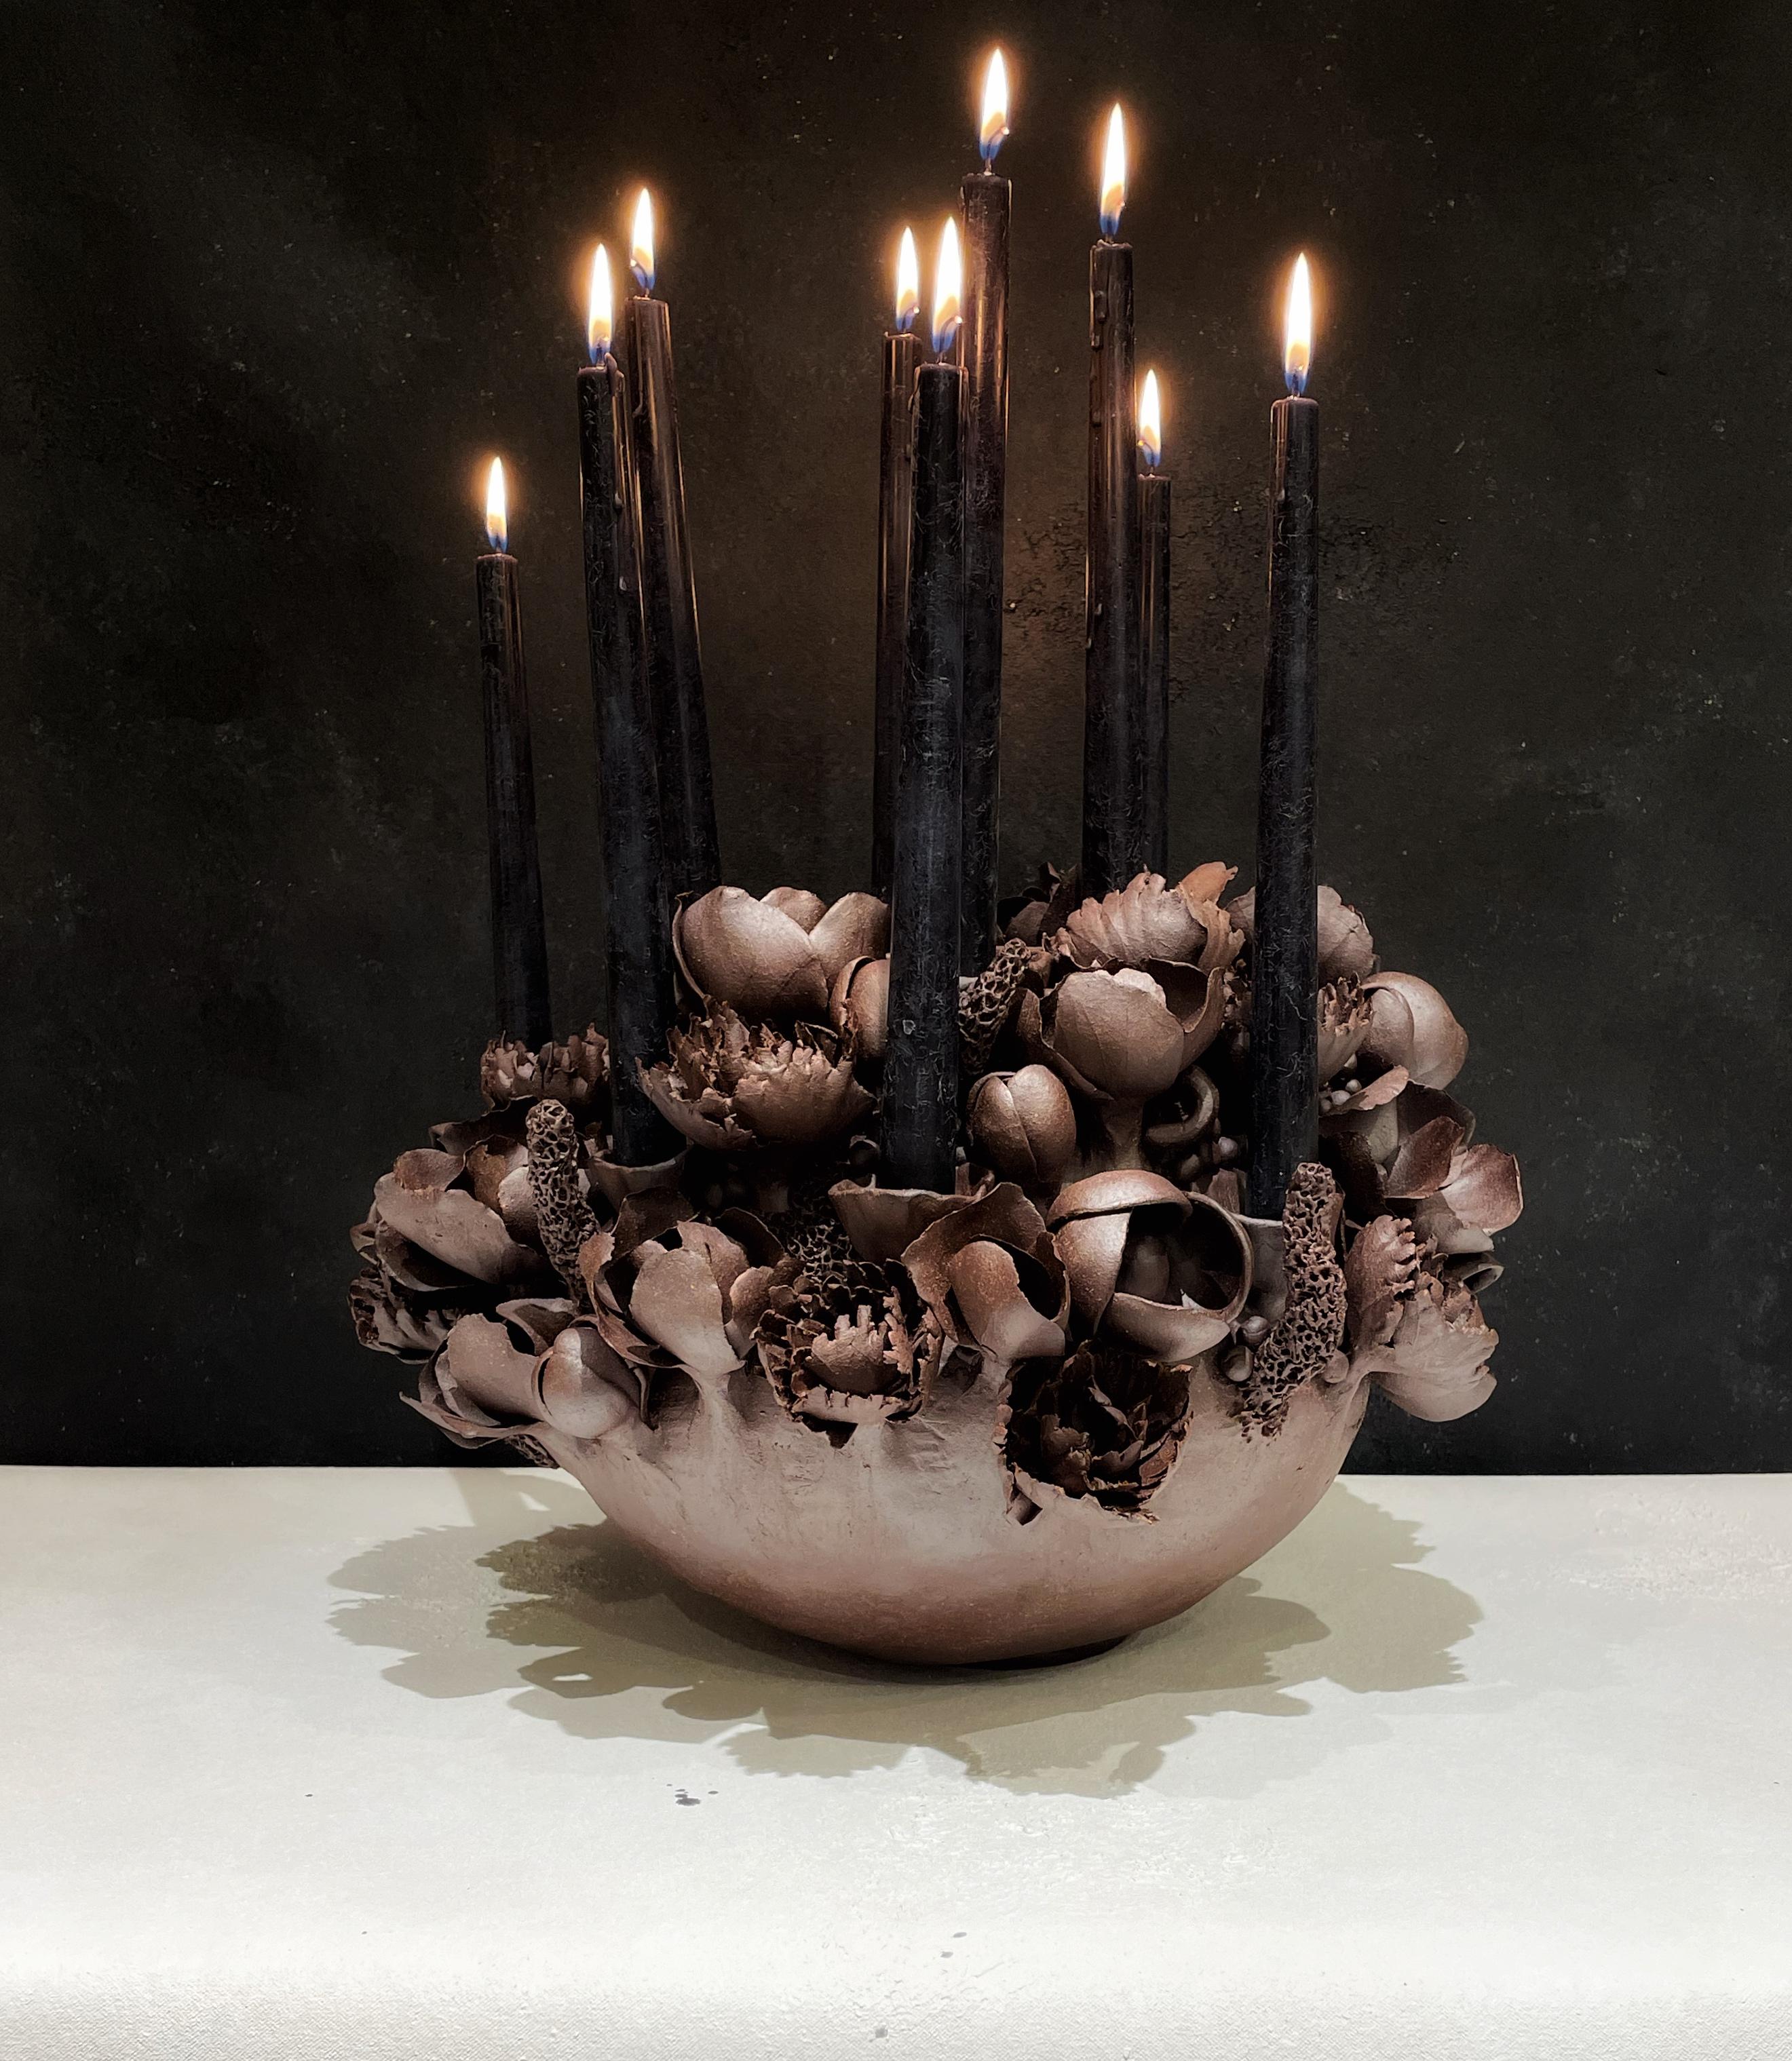 Dear You Ceramics is a Brooklyn based ceramic studio specializing in creating sculptural, functional pieces inspired by nature's bloom.   

This once of a kind vase is handmade in 2023 with earthenware and fired with gaskiln.    

Dear You pieces